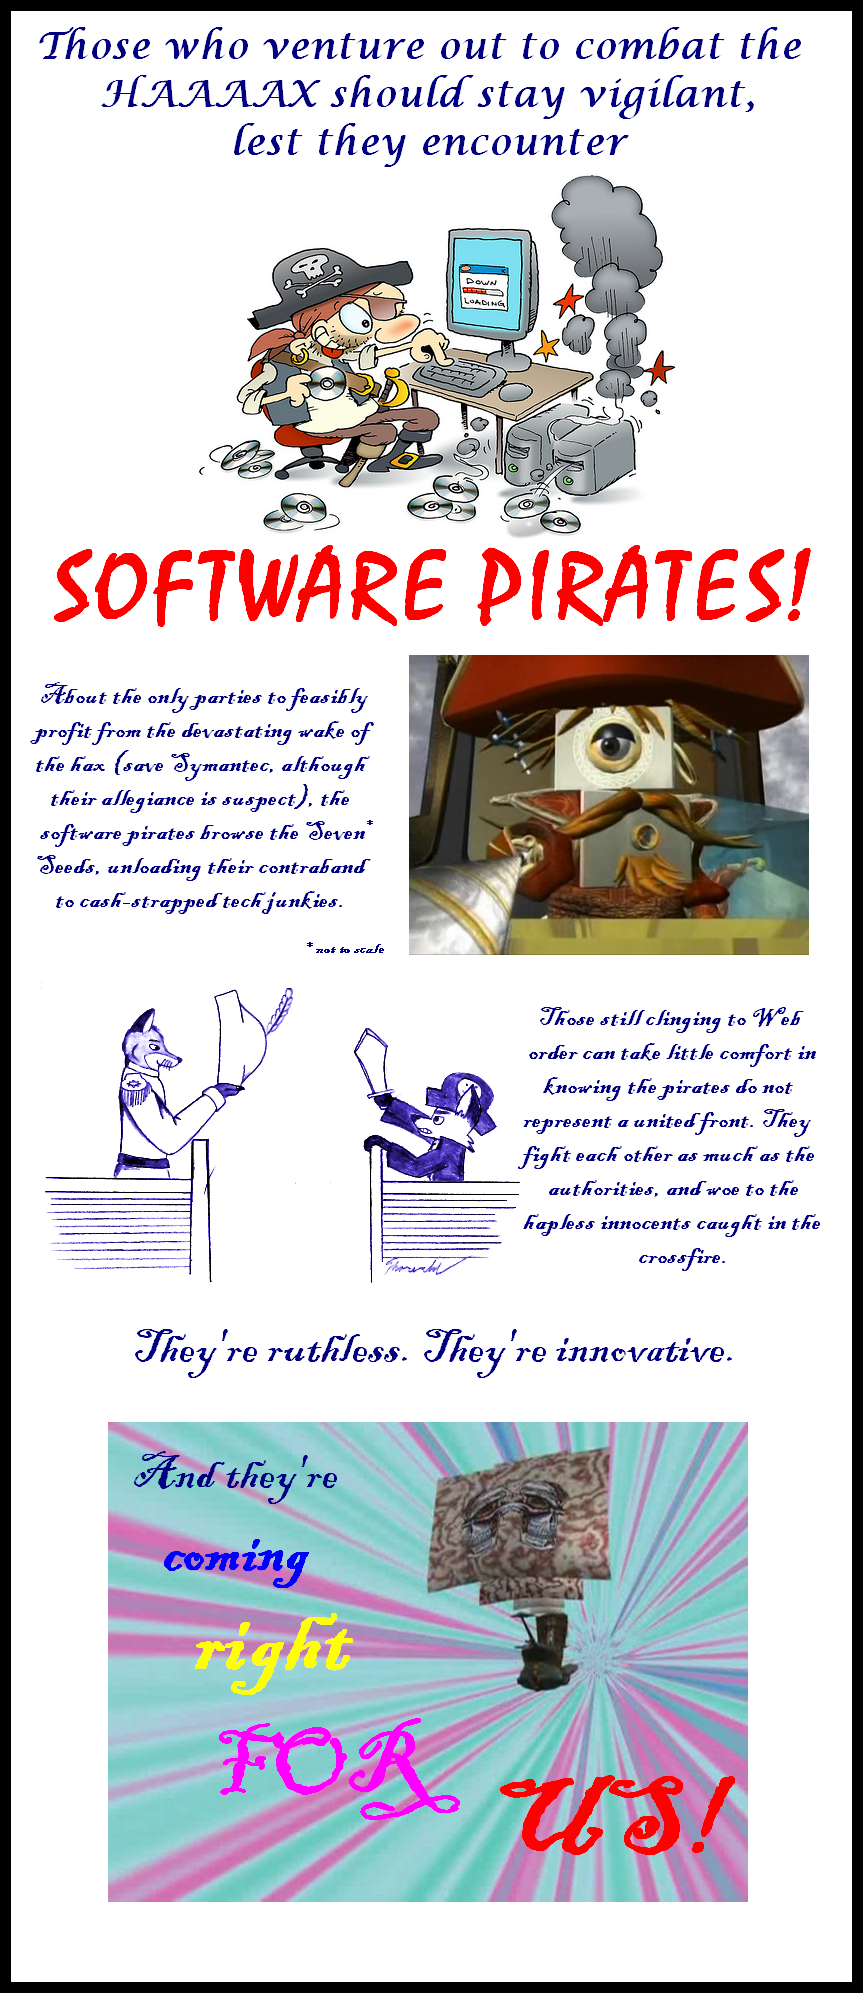 Enter the Software Pirates